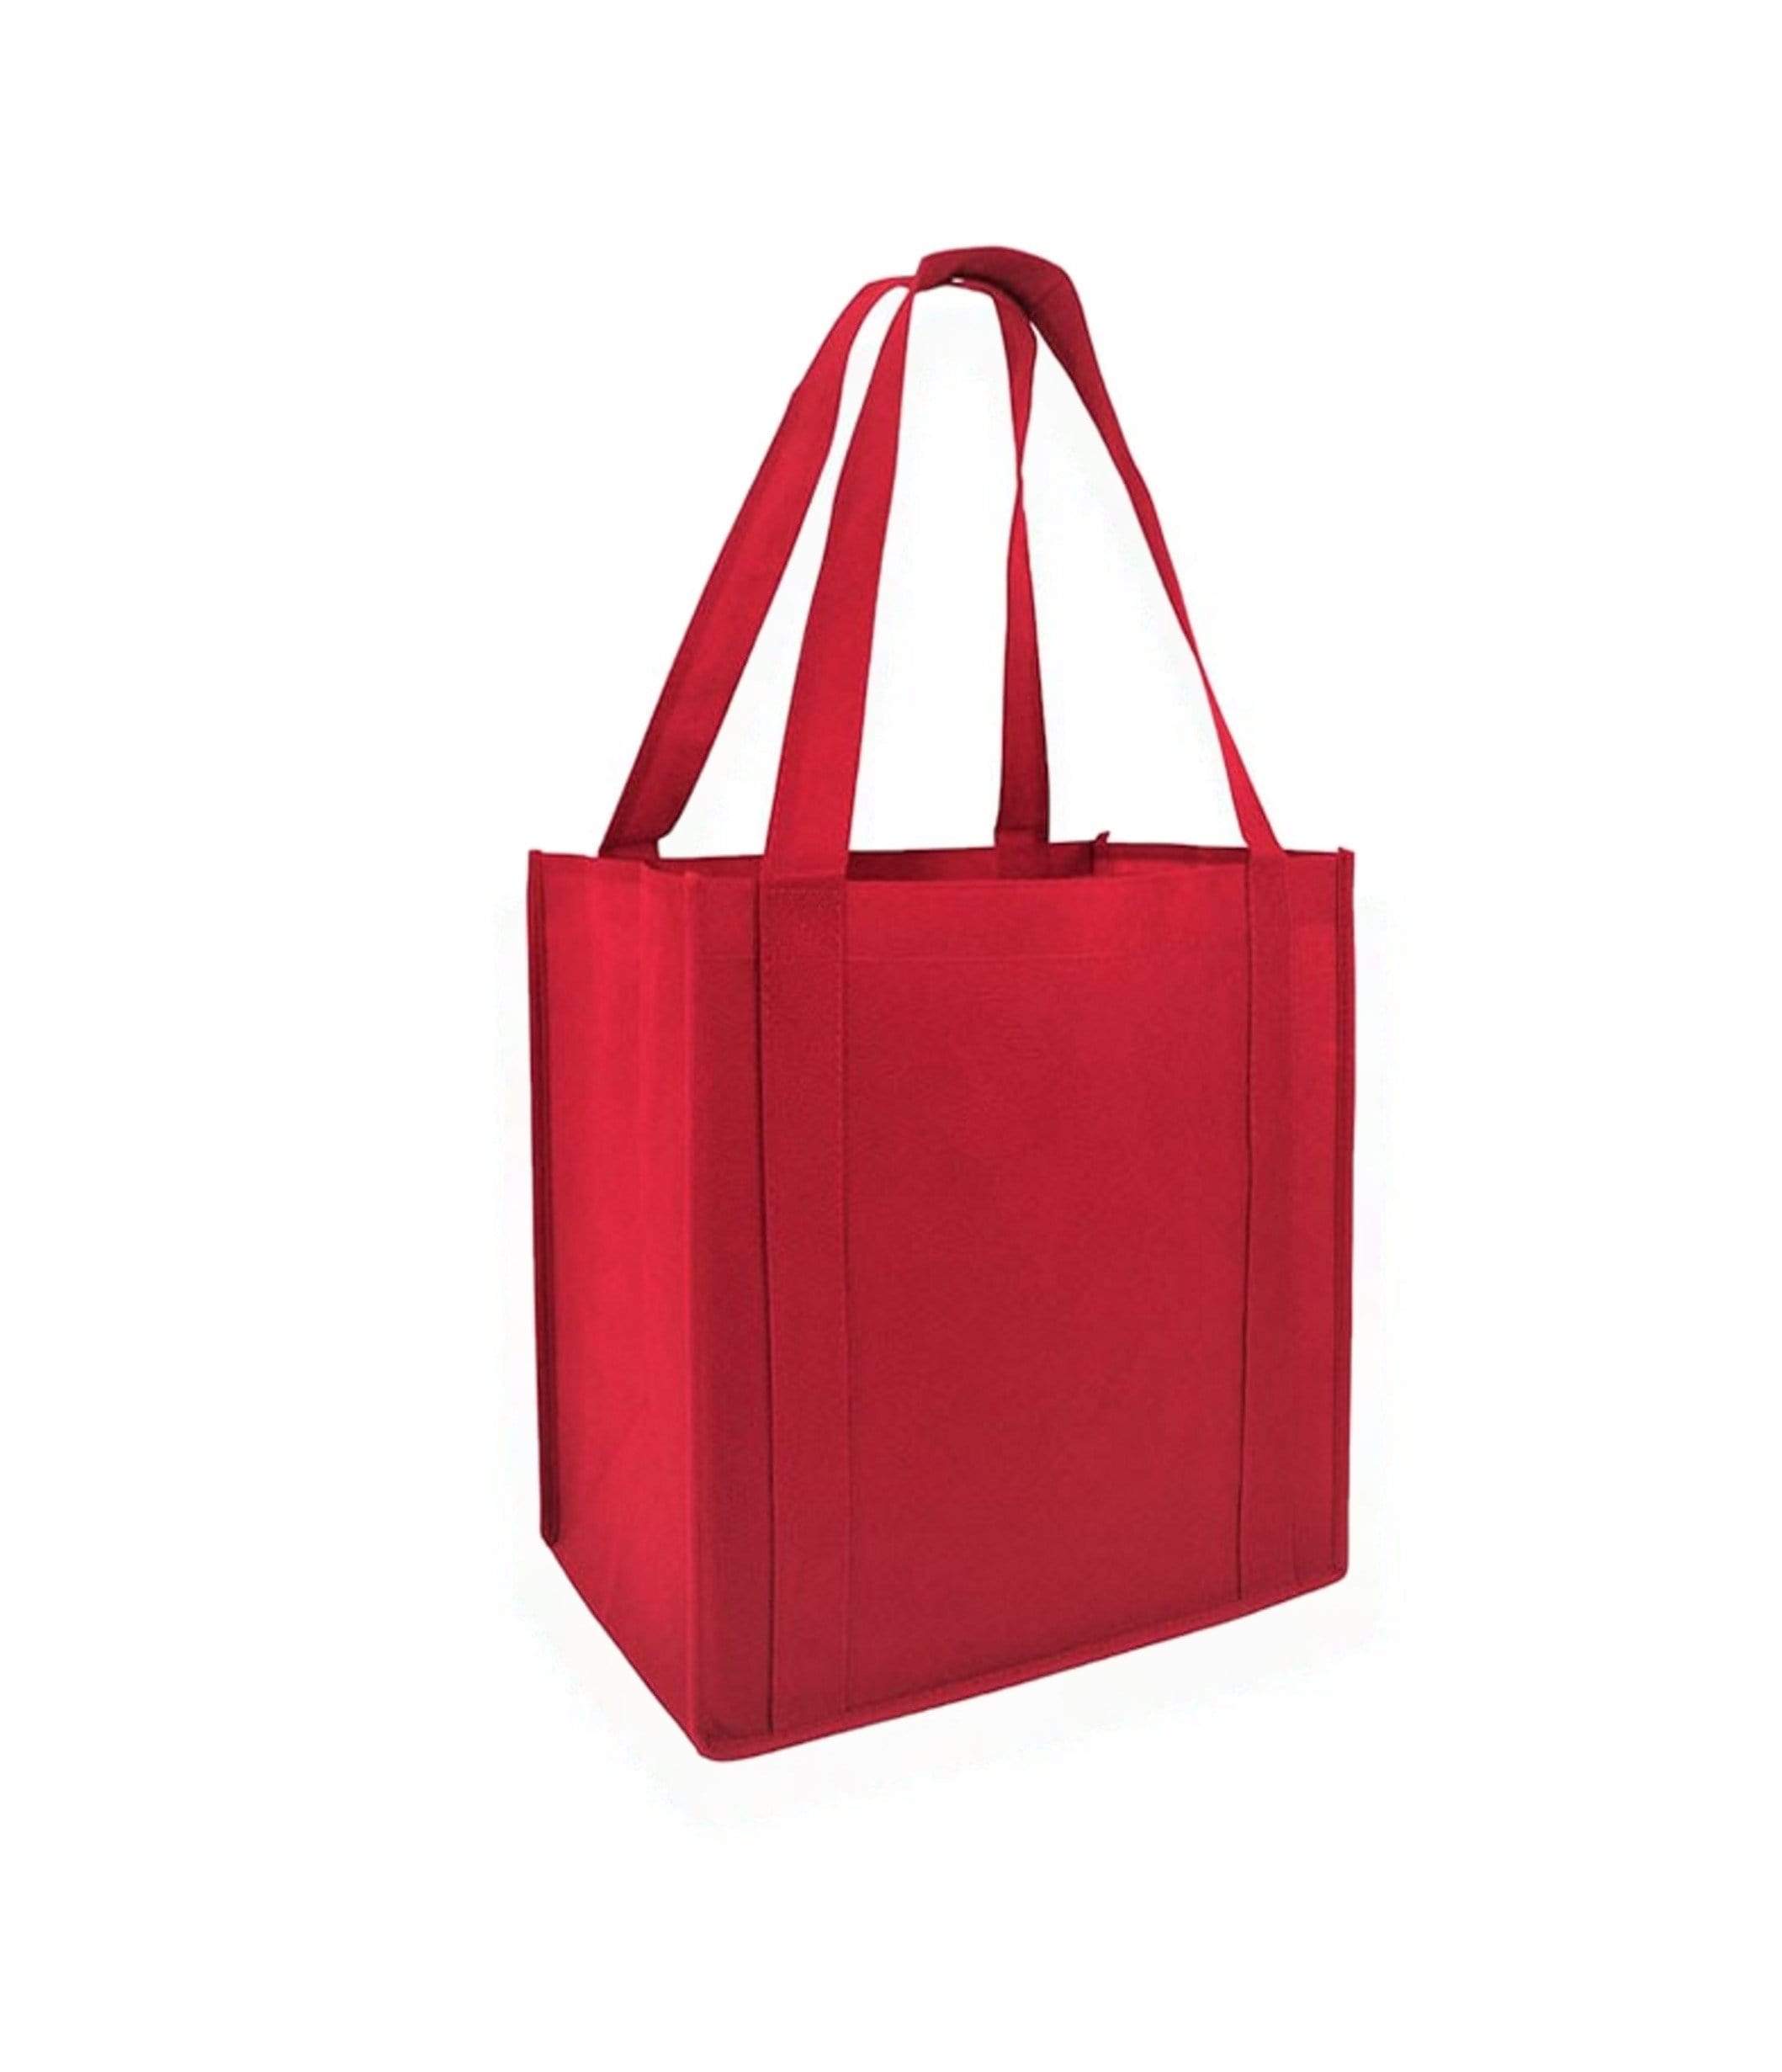 (Set of 12) 12 Pack- Cheap Non Woven Large Promotional Grocery Tote Bags  (Red)